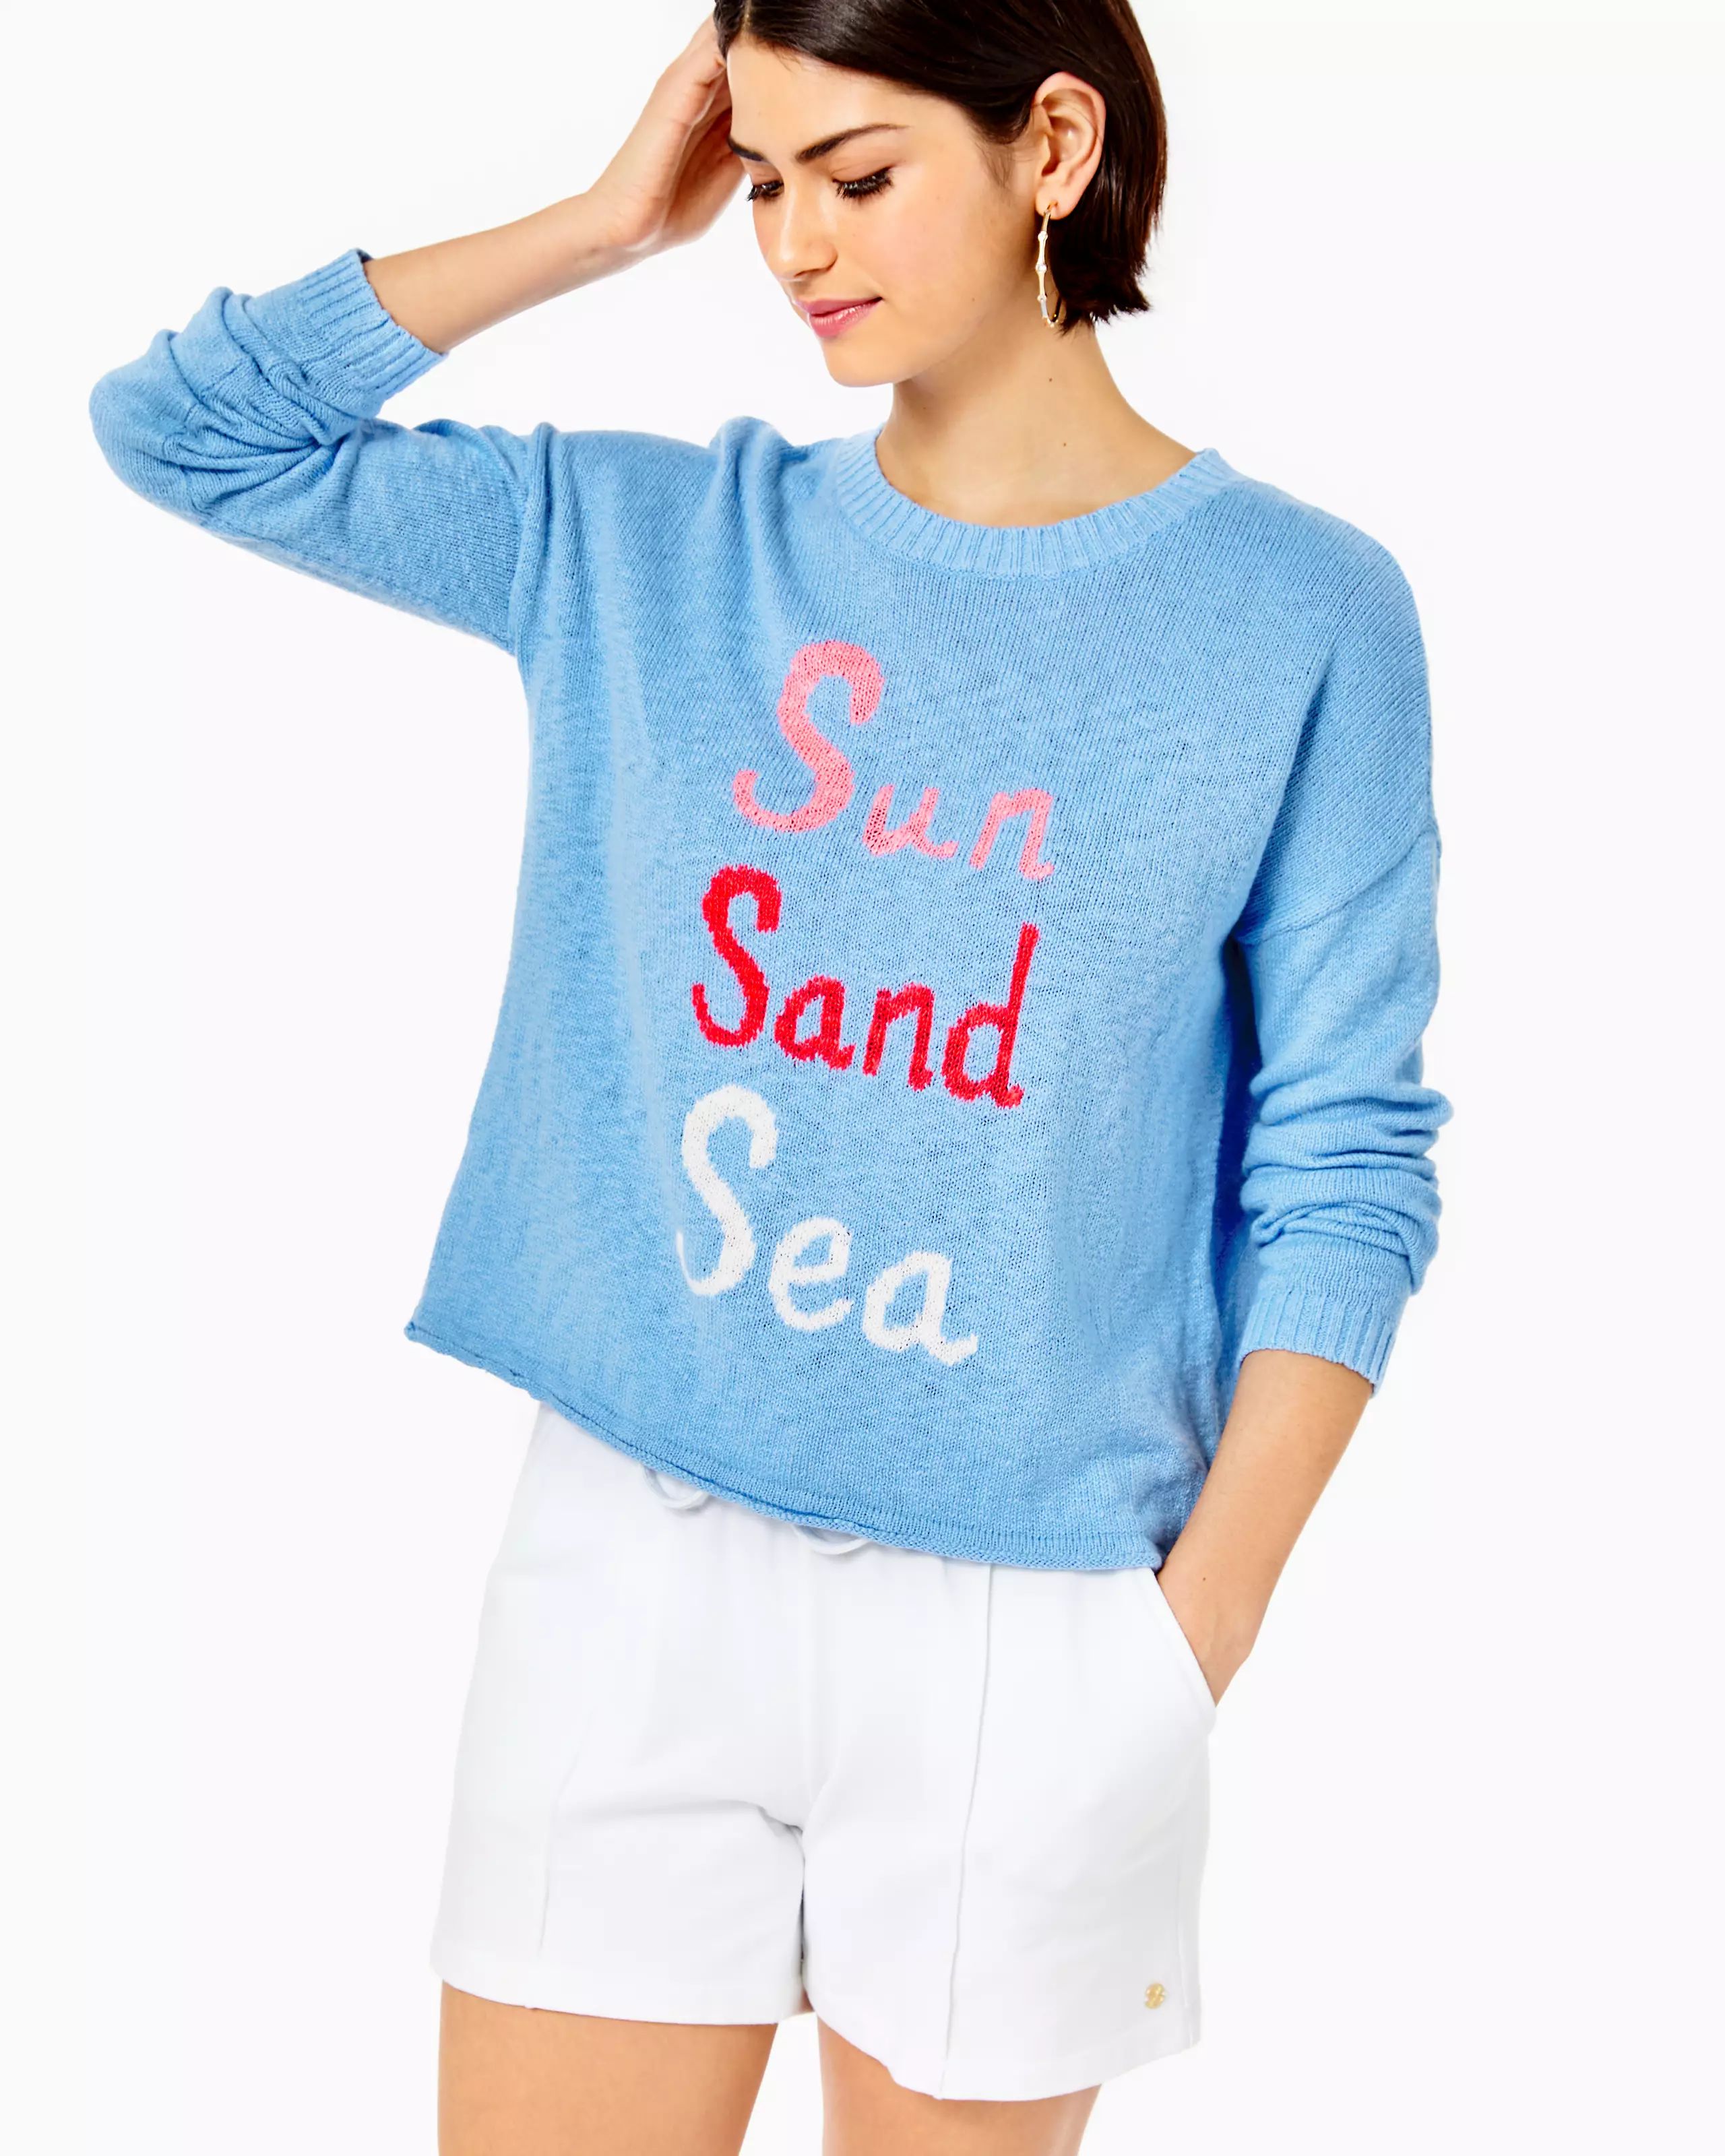 Pippy Sweater | Lilly Pulitzer